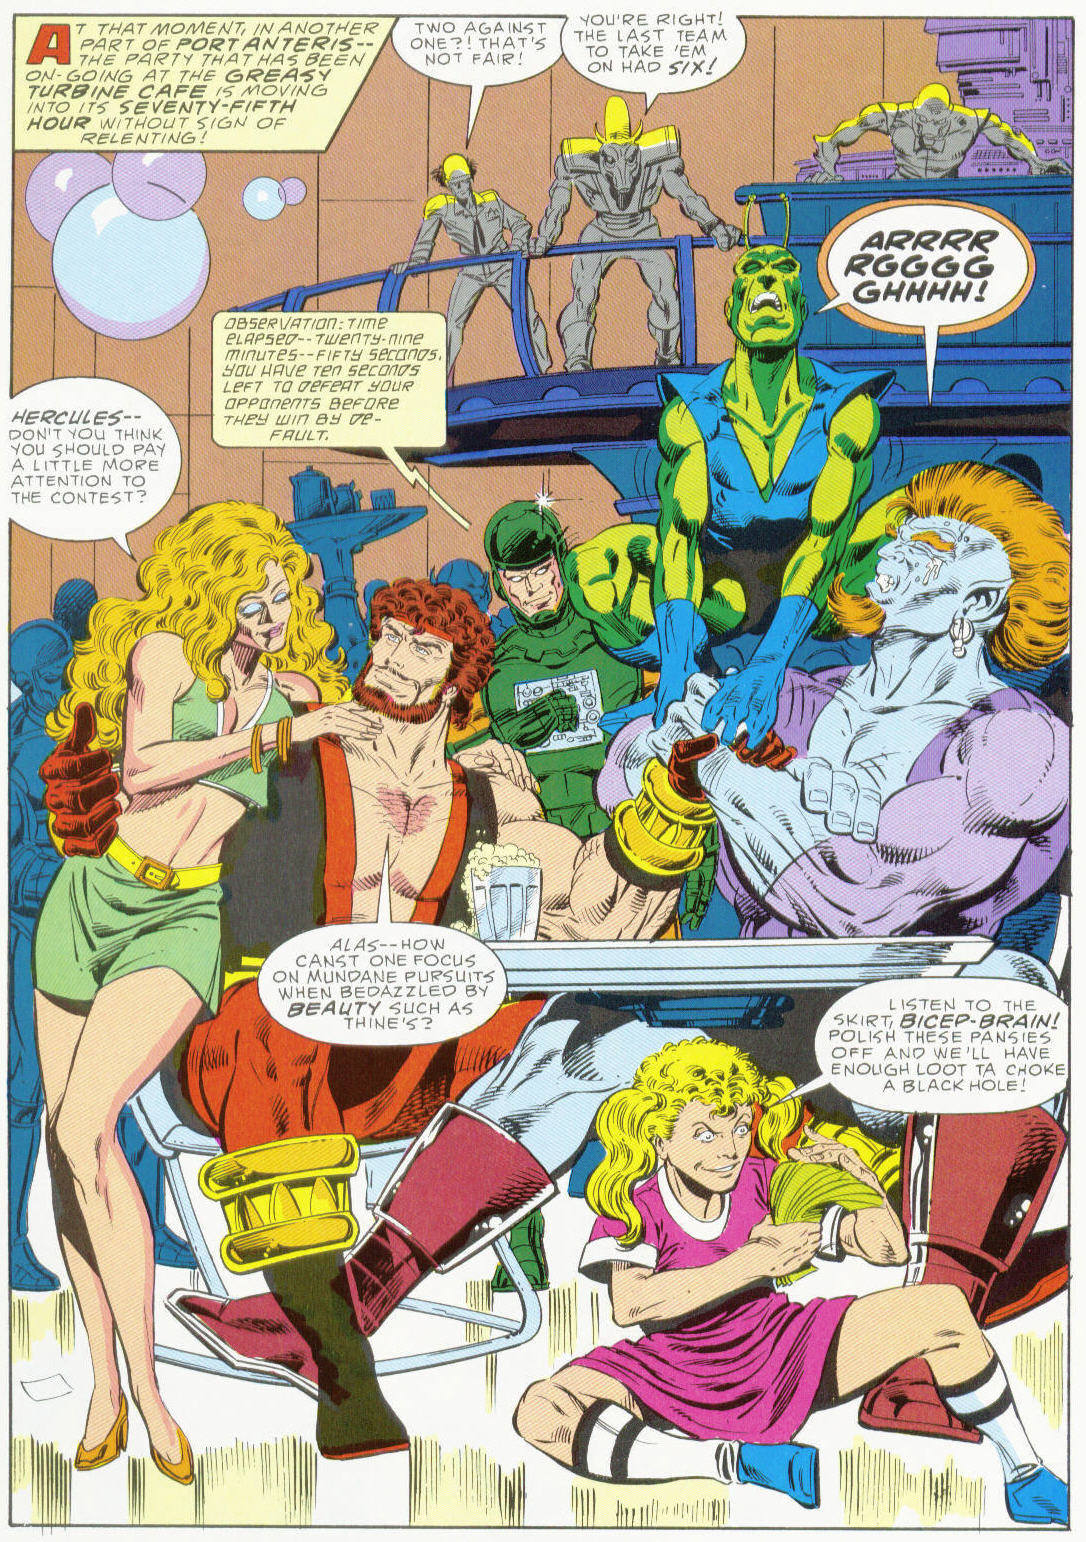 Marvel Graphic Novel issue 37 - Hercules Prince of Power - Full Circle - Page 16